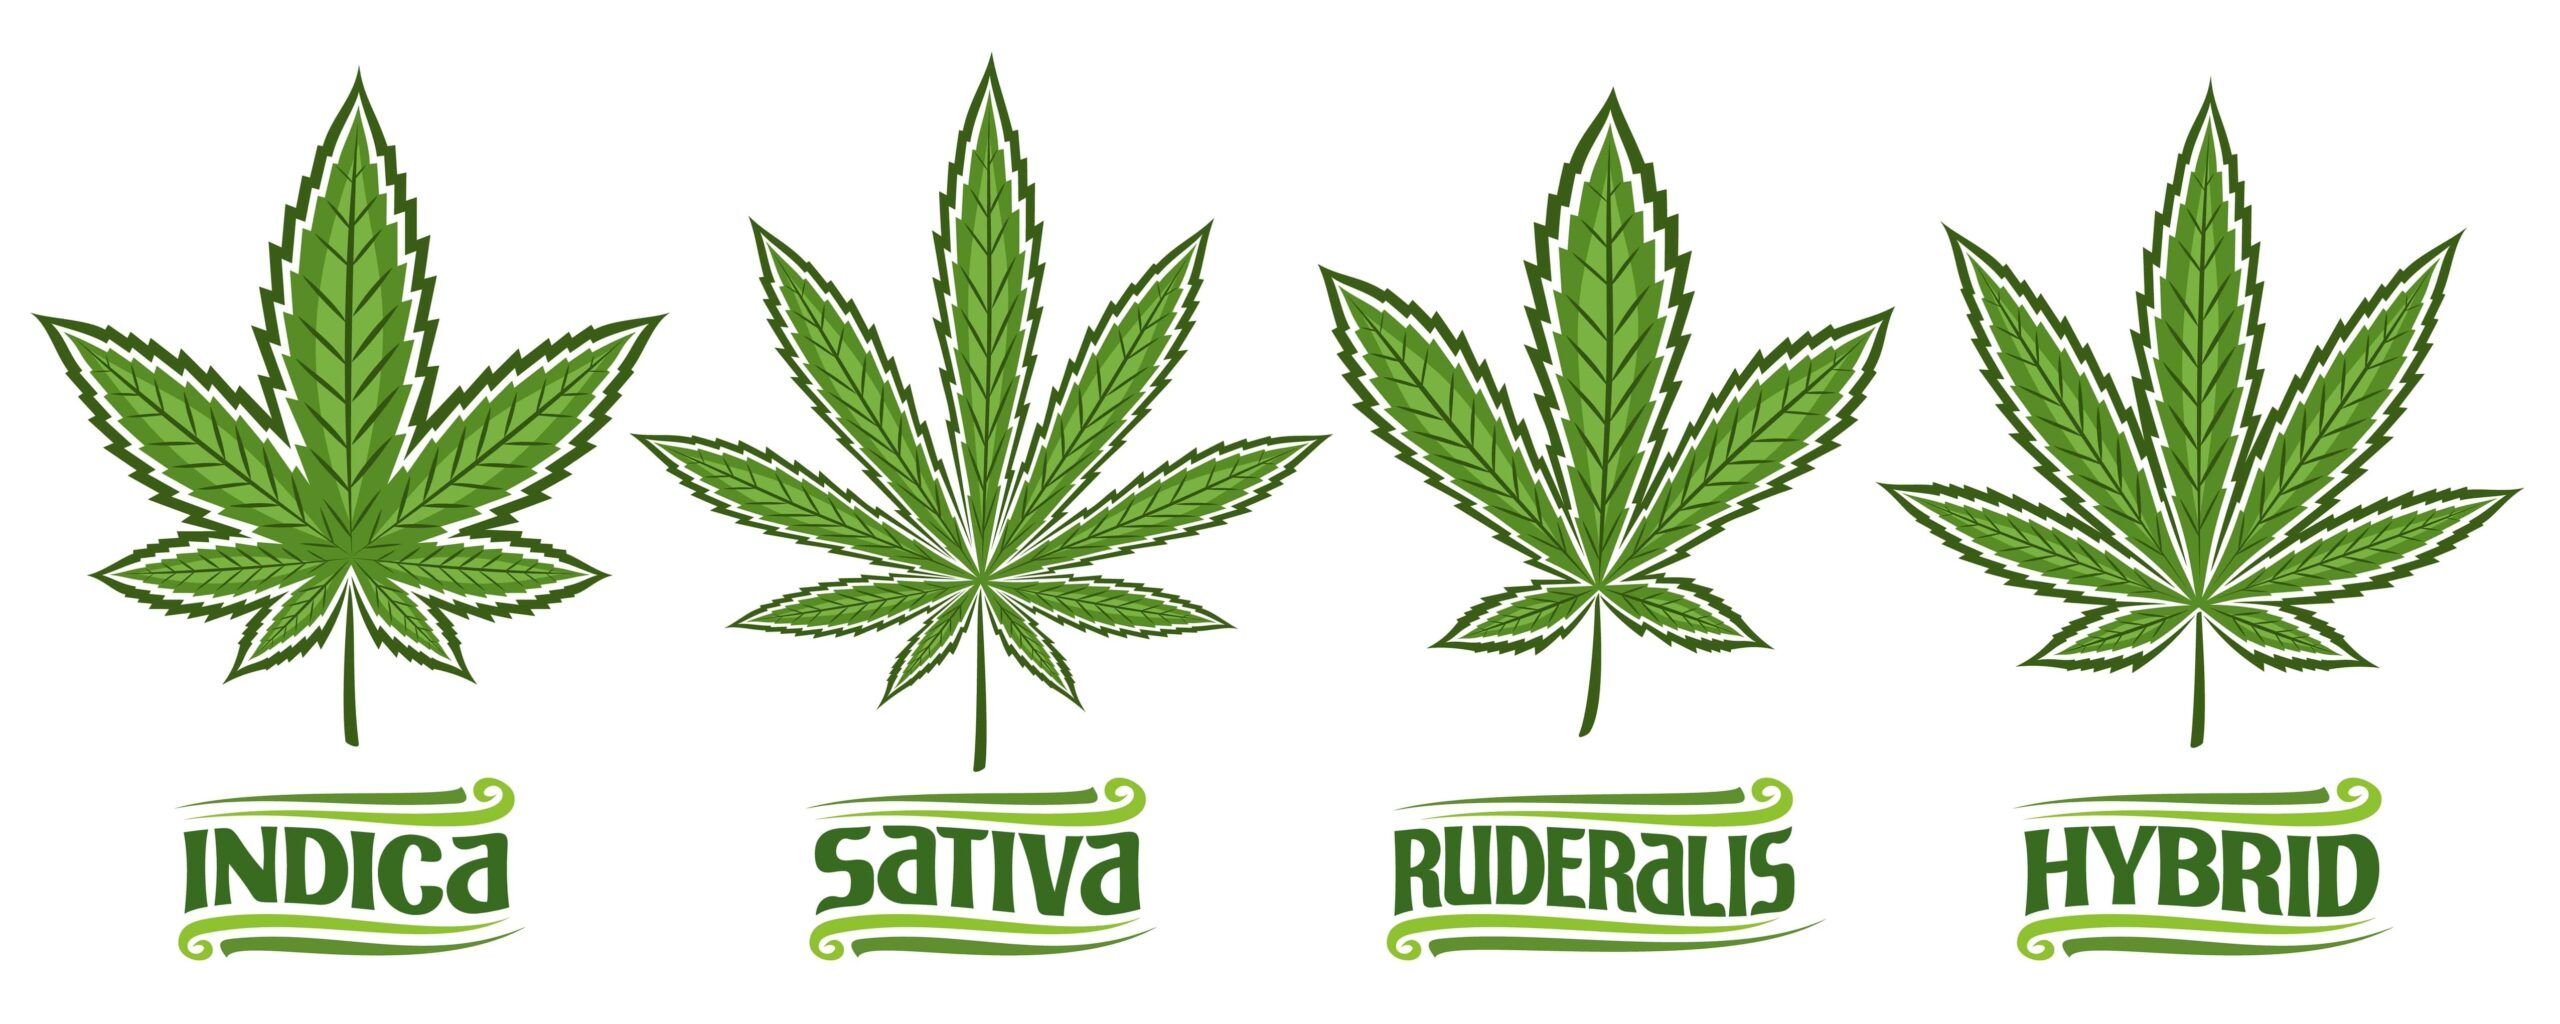 4 types of cannabis leaves